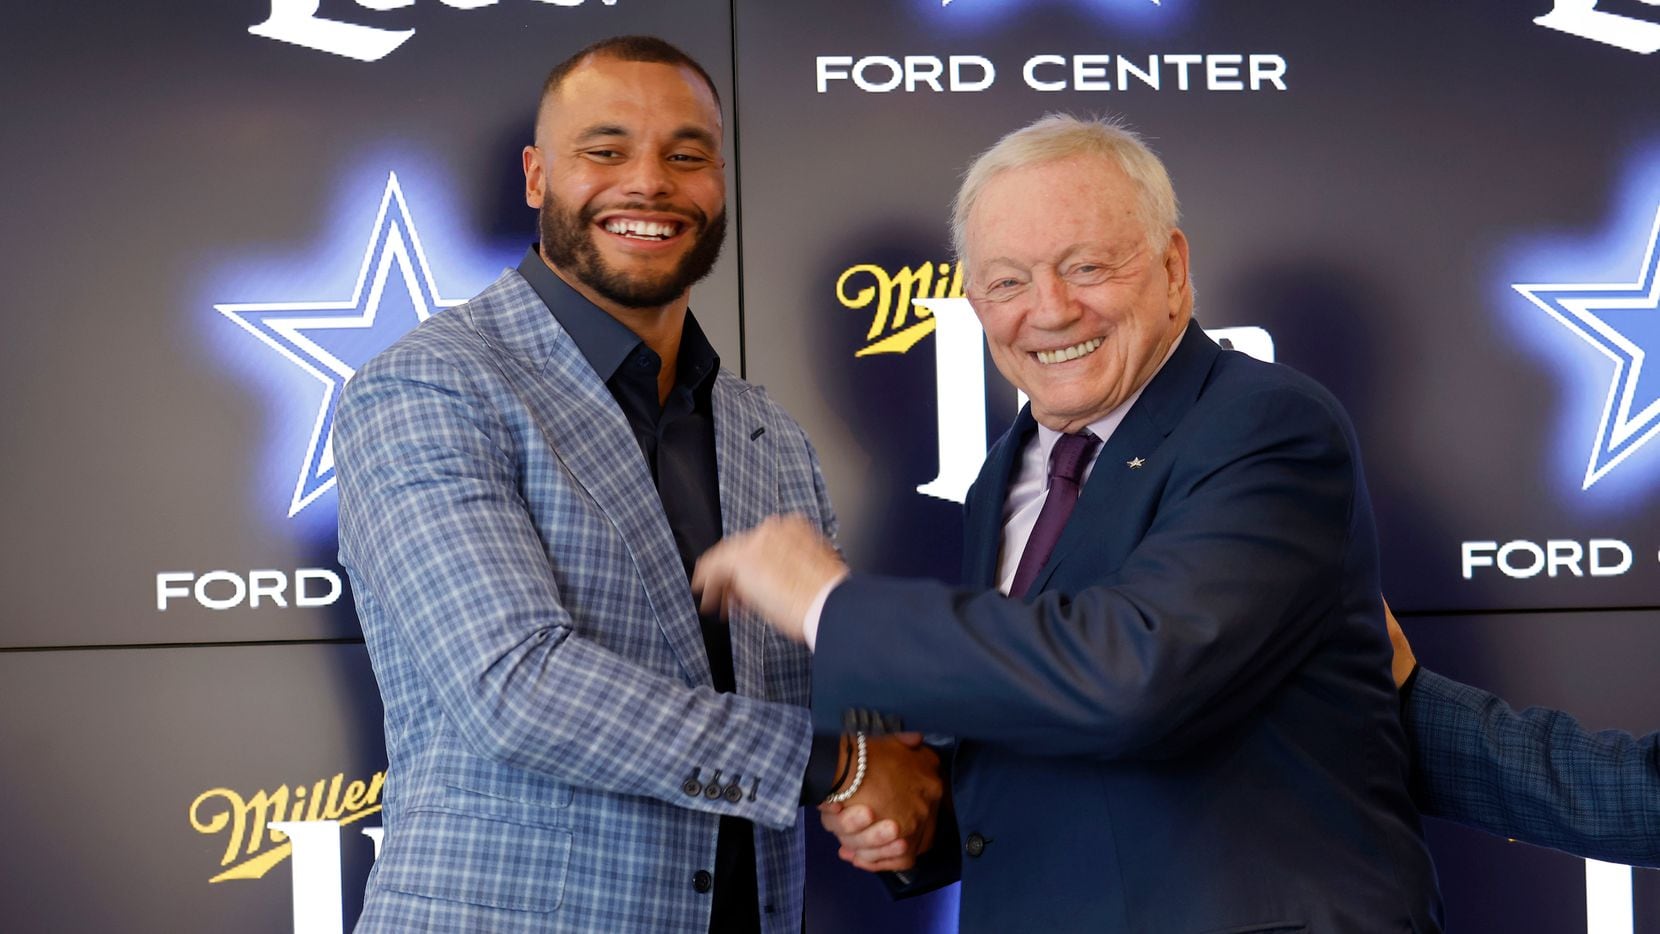 Dallas Cowboys quarterback Dak Prescott (left) and Dallas Cowboys owner Jerry Jones shake hands following a press conference at The Star in Frisco, Texas, Wednesday, March 10, 2021. Dak spoke about his freshly signed 4-year, $160 million contract with the team.